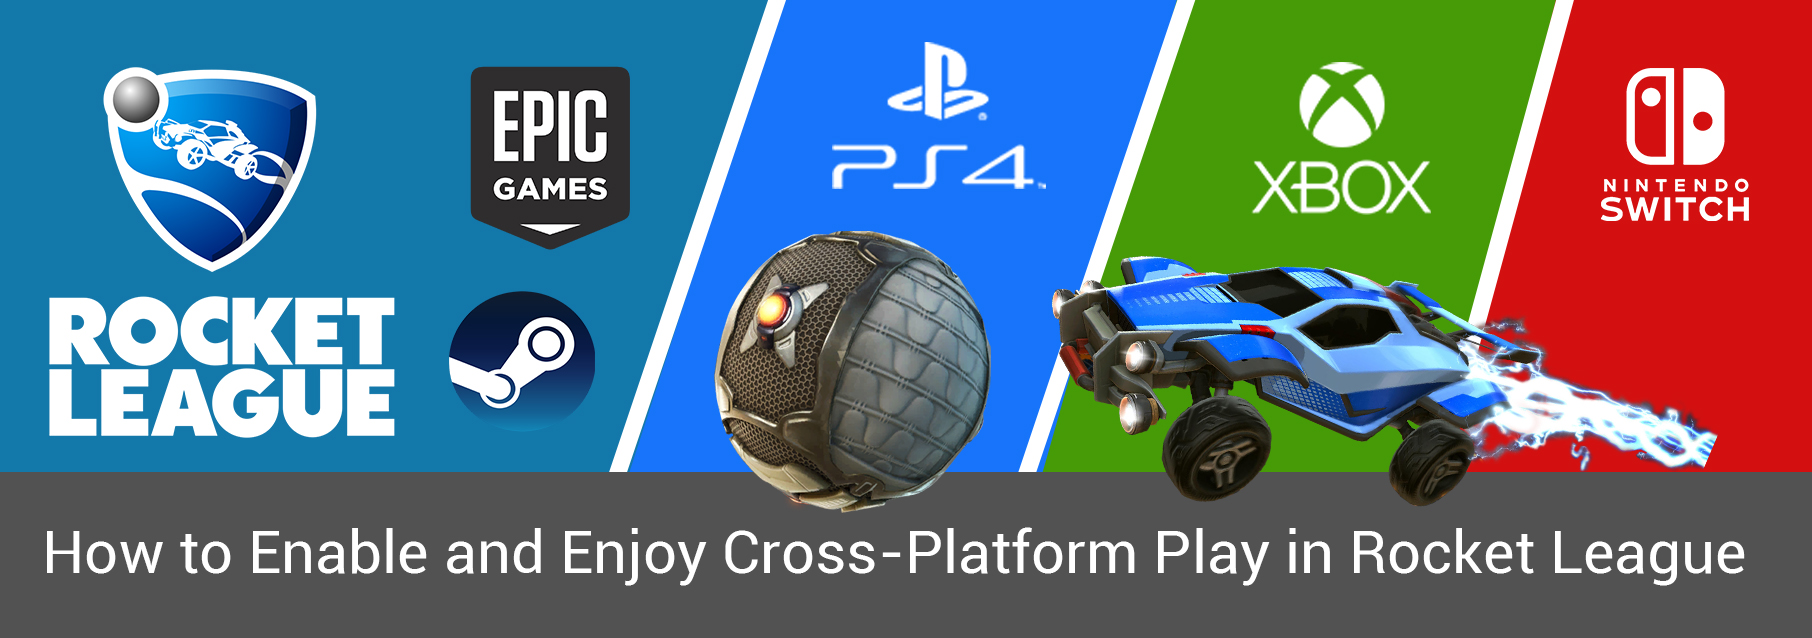 How to Enable and Enjoy Cross-Platform Play in Rocket League